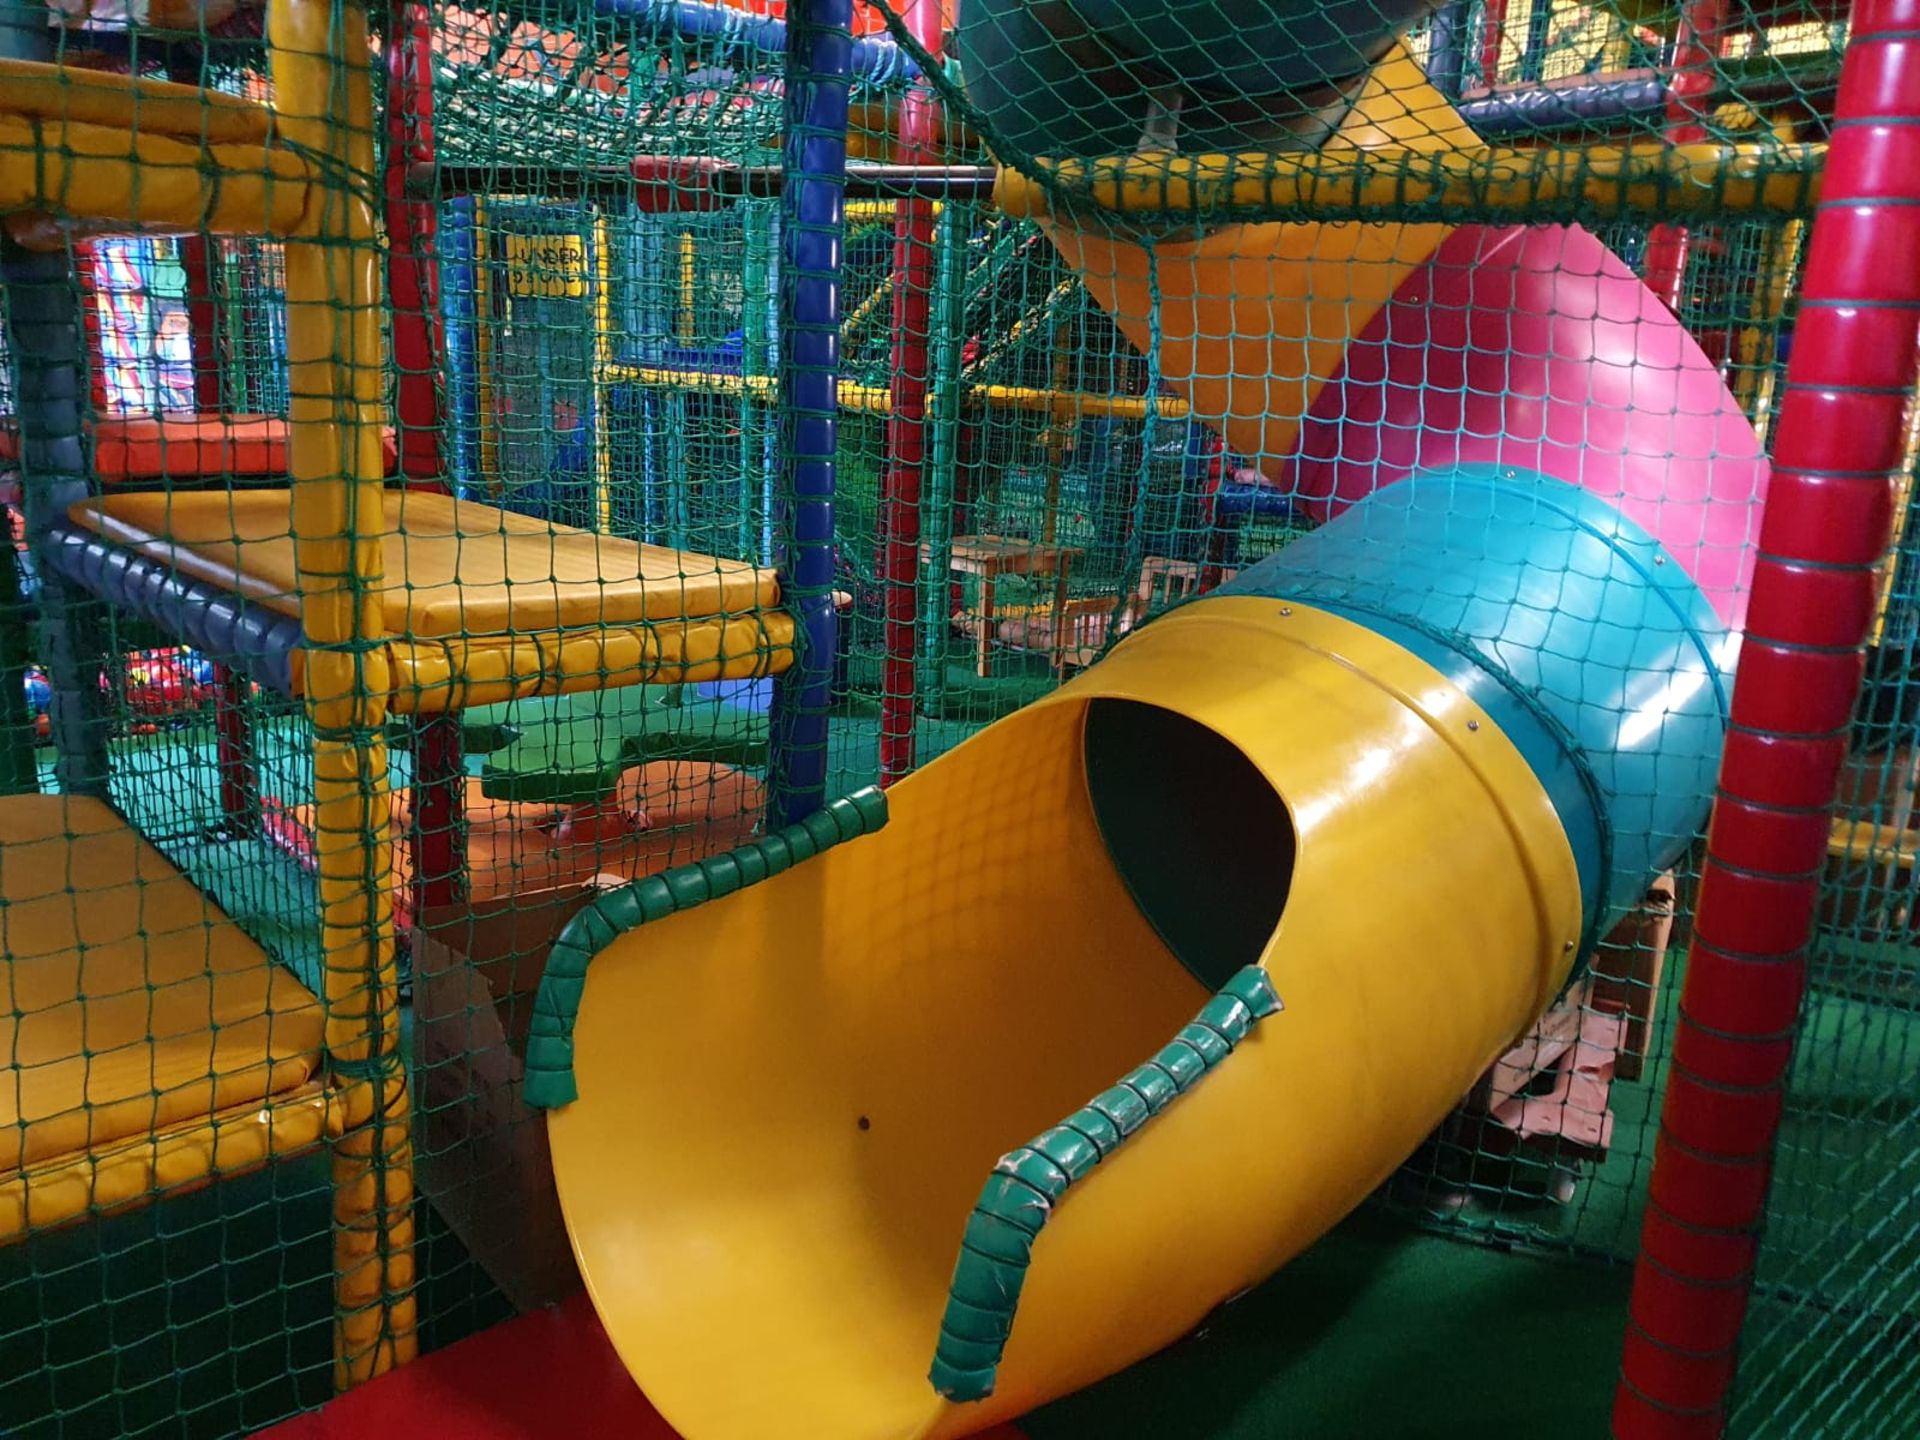 Bramleys Big Adventure Playground - Giant Action-Packed Playcentre With Slides, Zip Line Swings, - Image 114 of 128